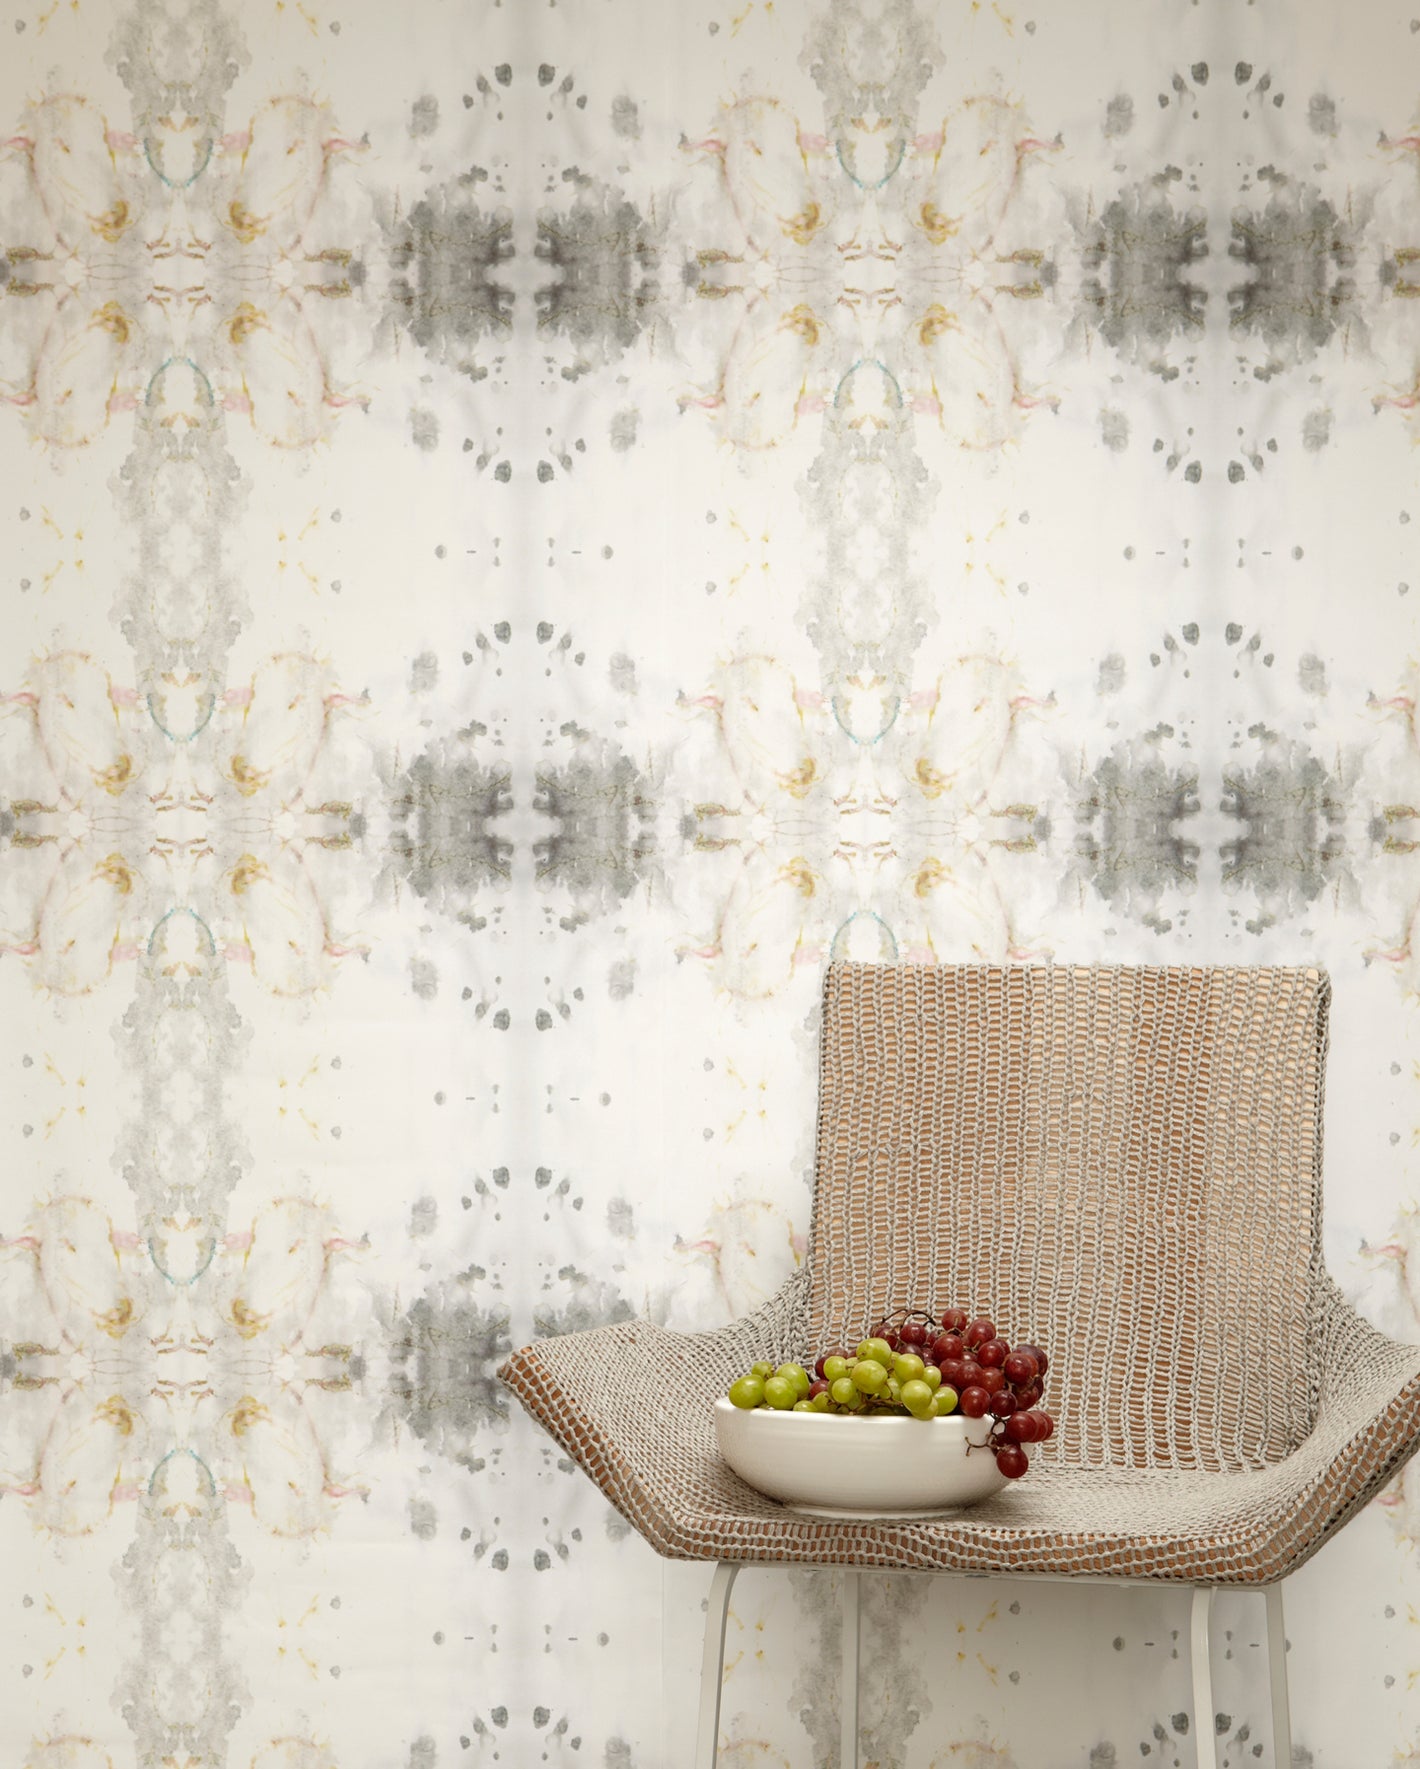 A chair with a bowl of grapes in front of a wallpaper